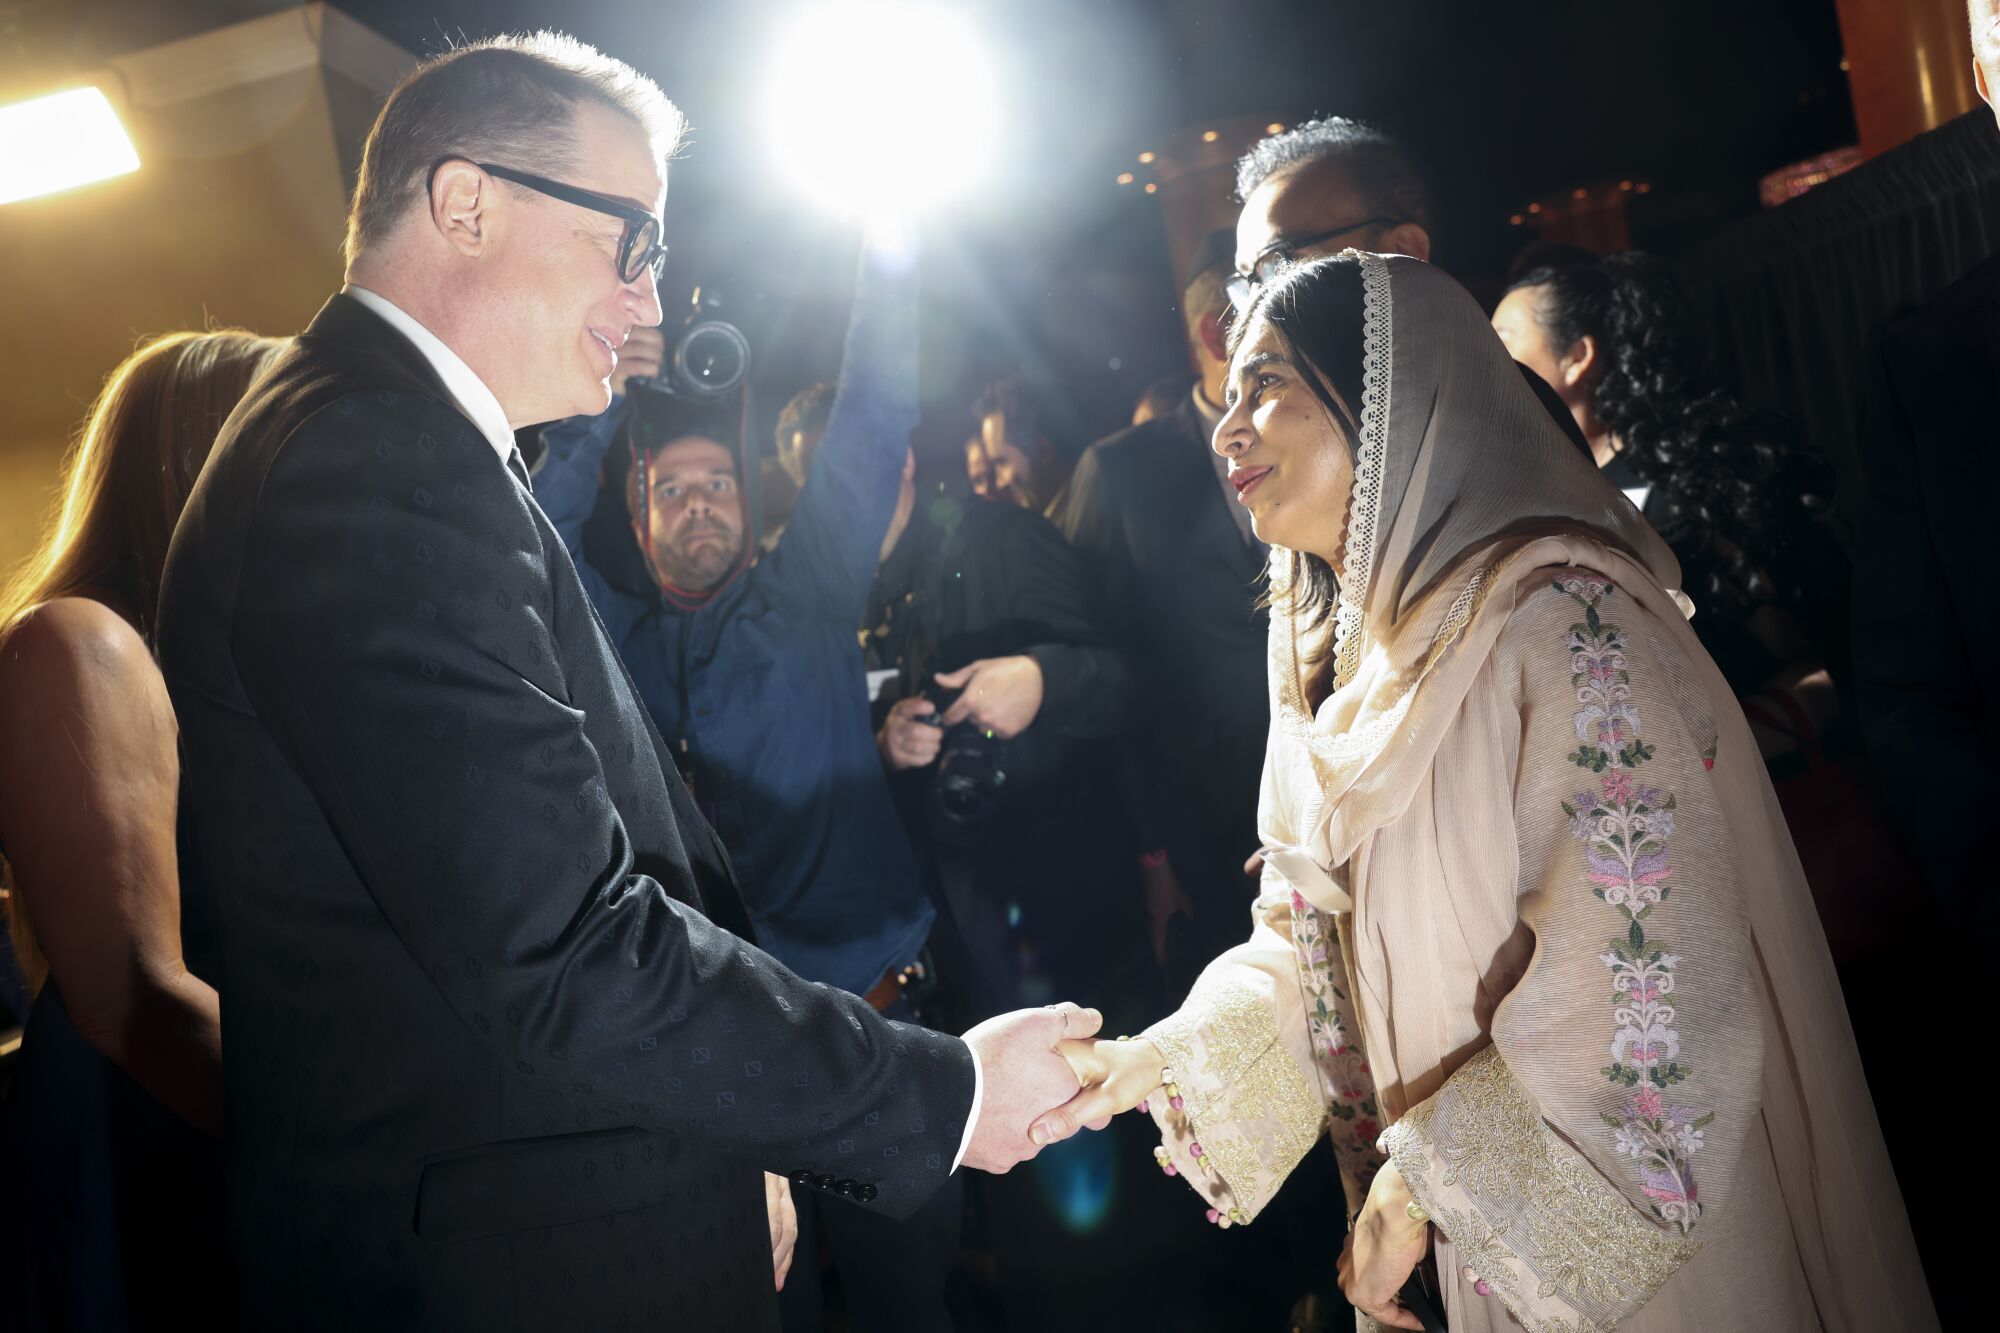 A man in a suit shakes hands with a woman in traditional Pakistani dress.